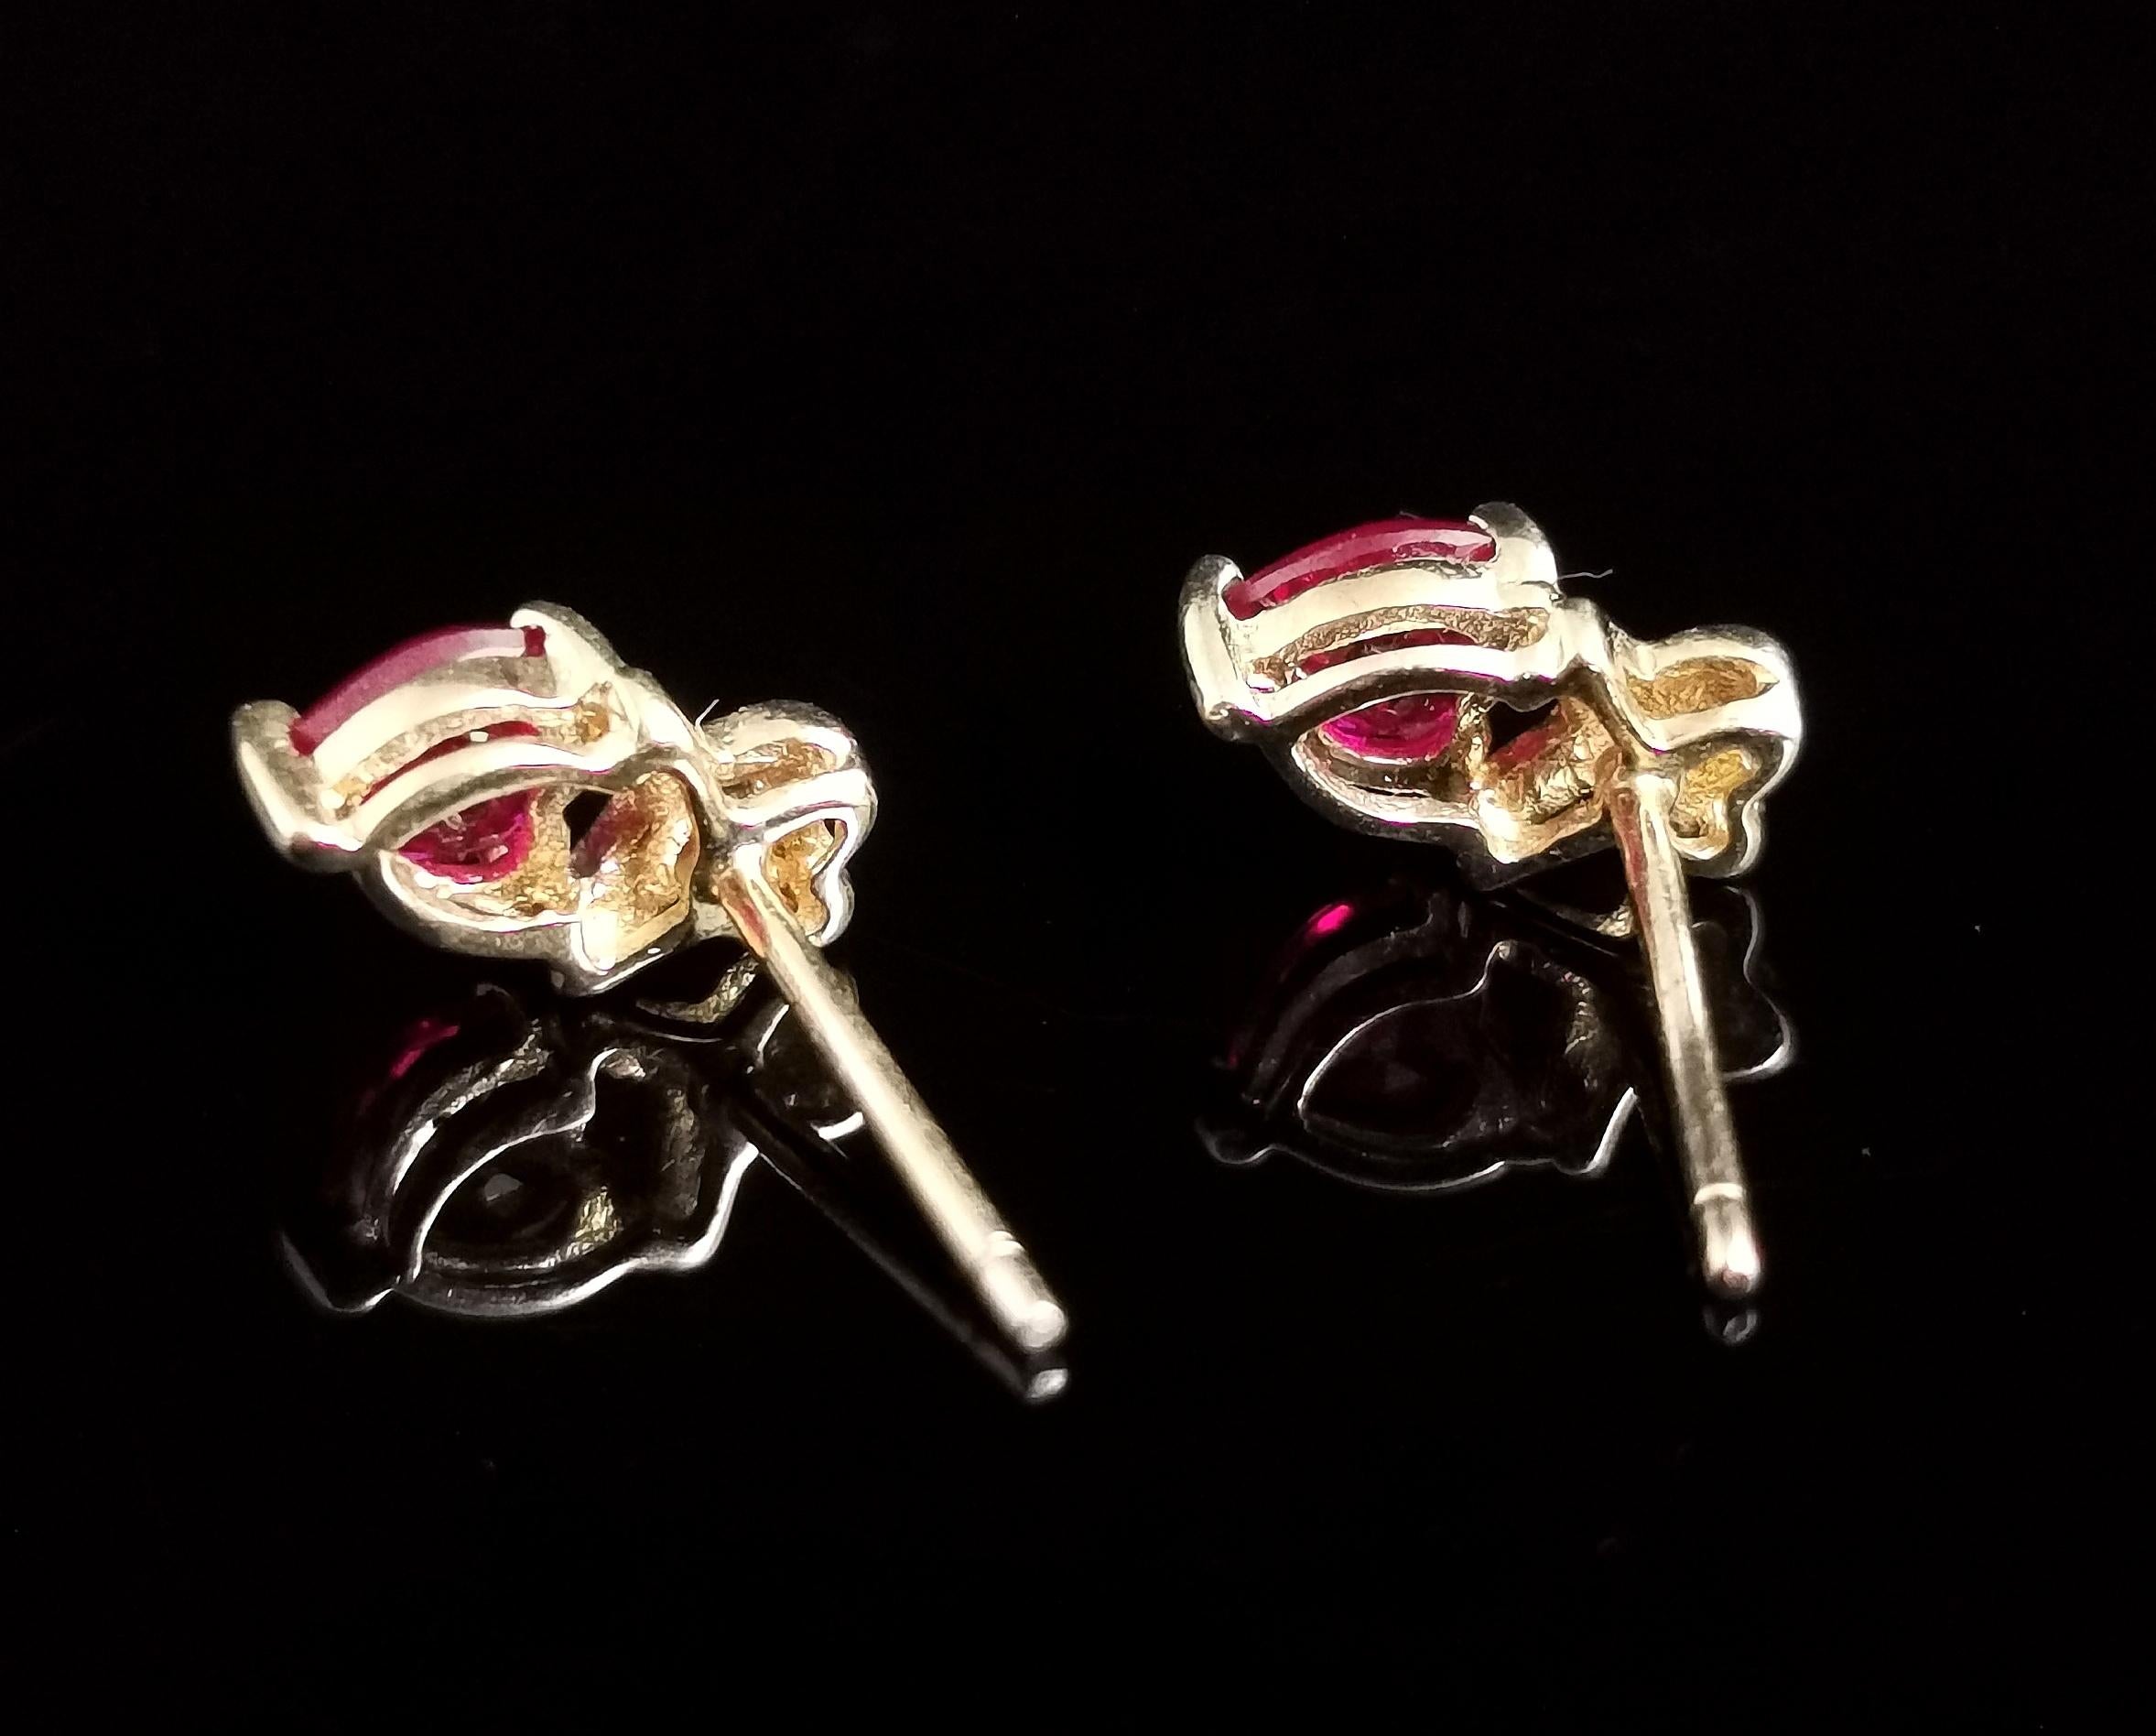 Vintage Synthetic Ruby and Diamond Heart Earrings, Studs, 9 Karat Gold  1